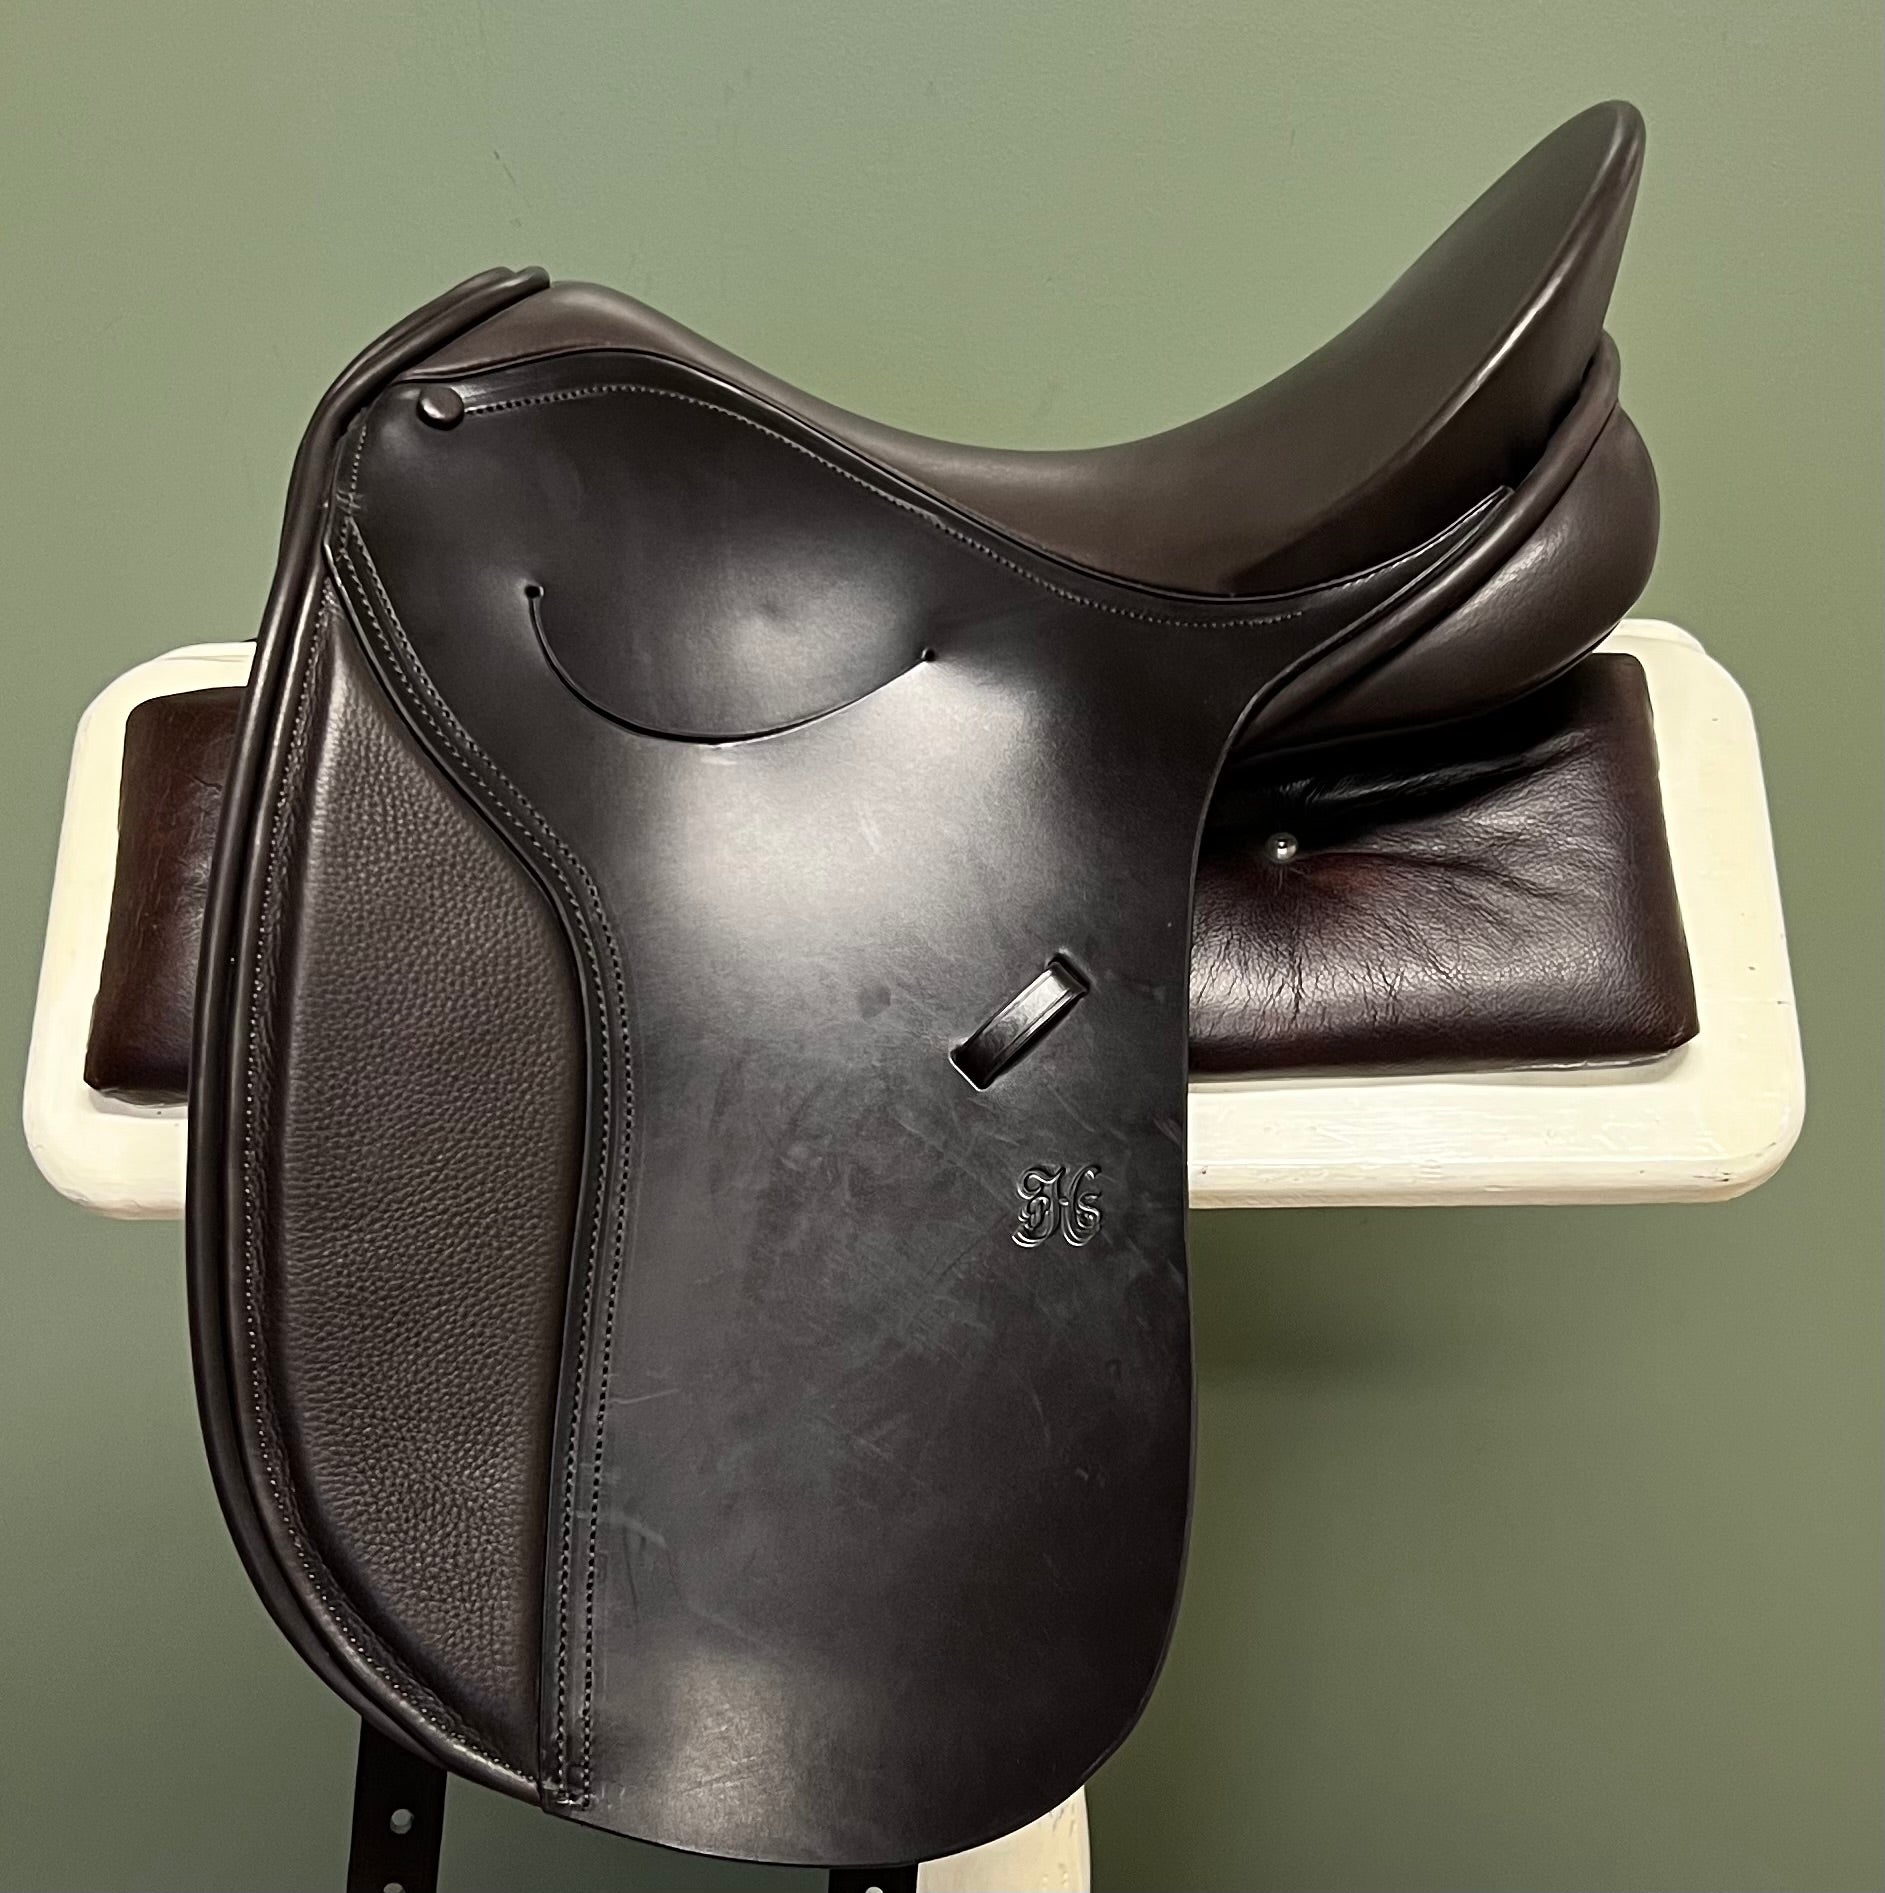 STOCK CLEARANCE PH Royal 2 Saddle in Dark Havana Smooth English Leather Brown 15.5 inch